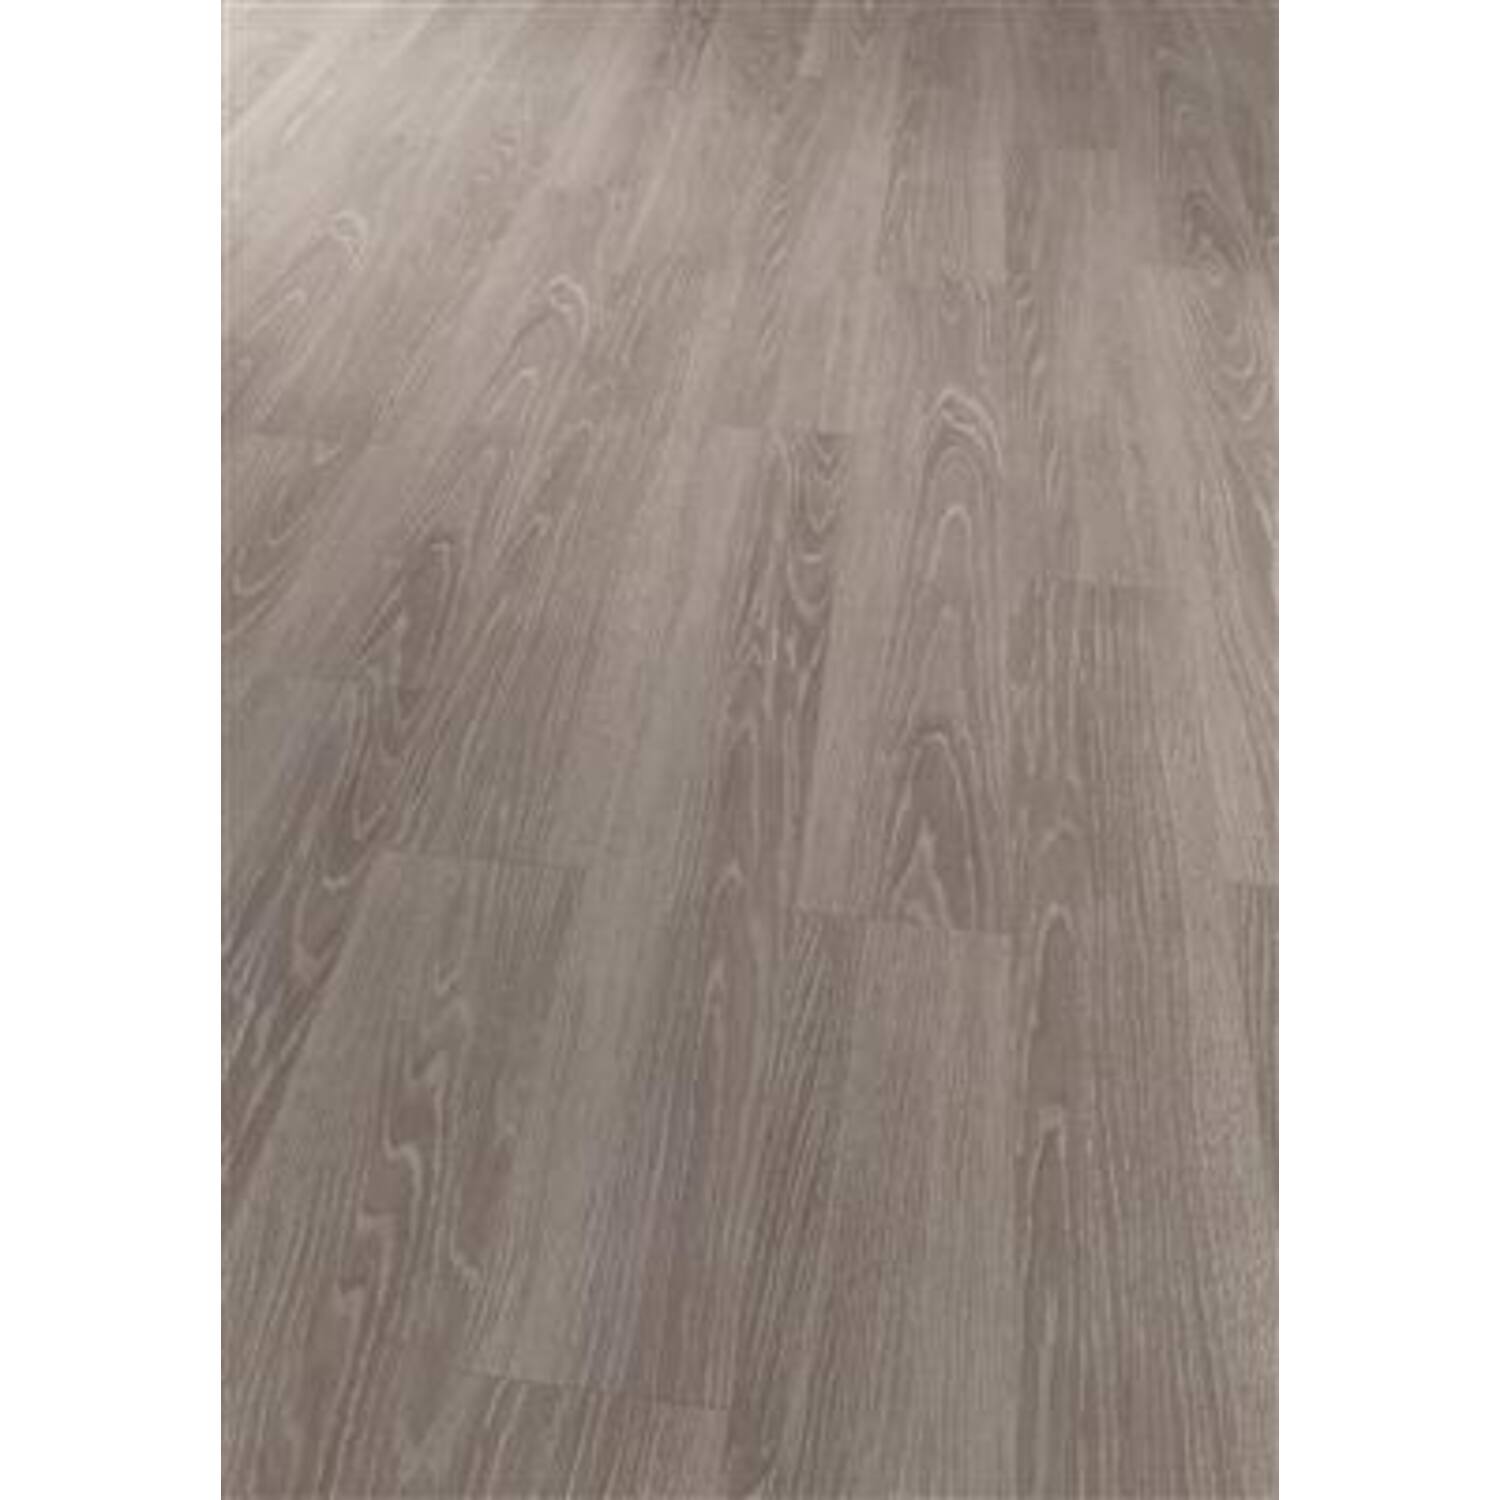 EXPONA Commercial Style 4082 Grey Limed Oak